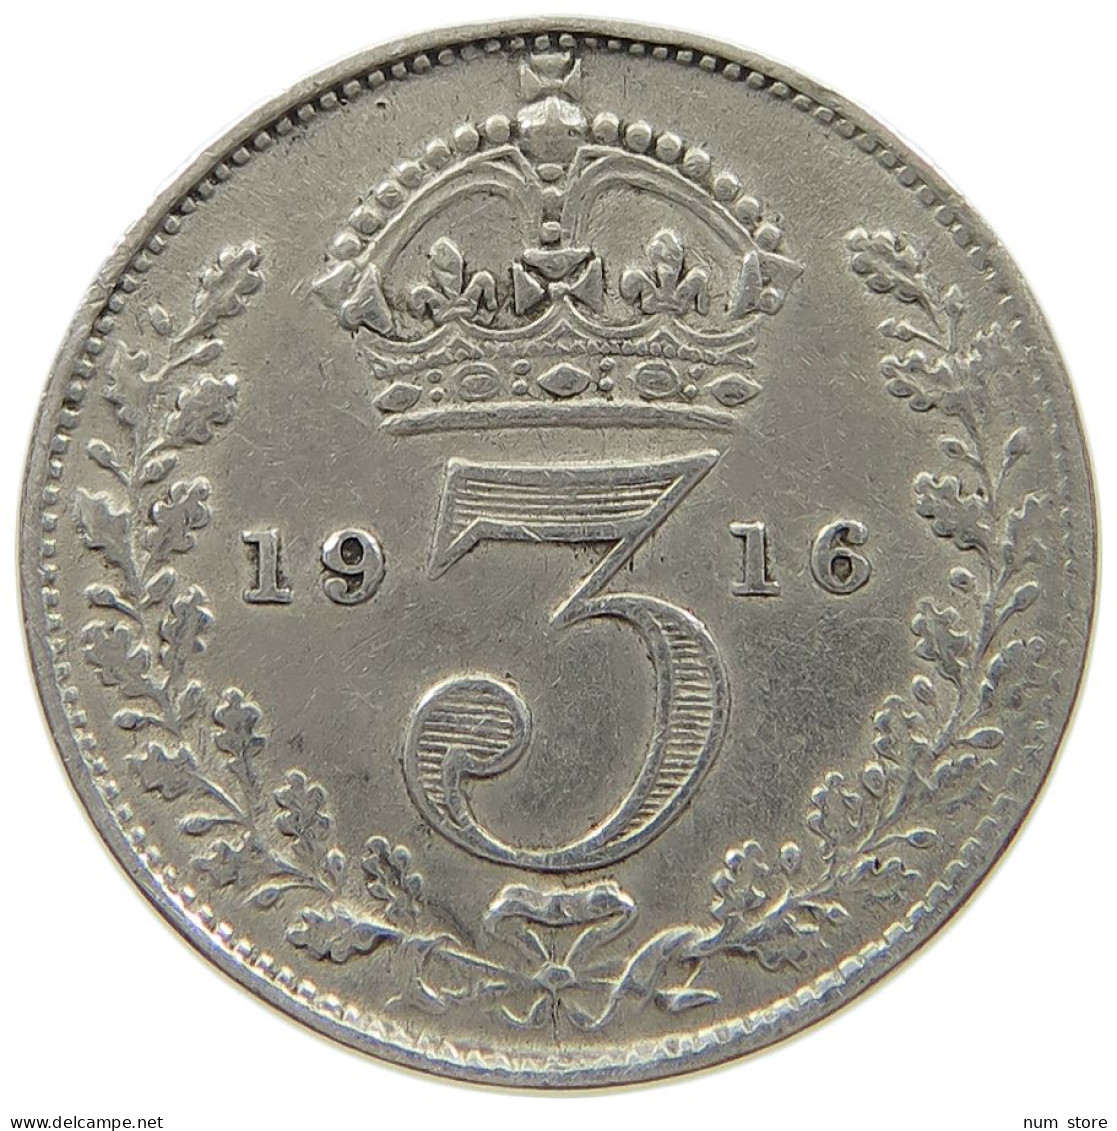 GREAT BRITAIN THREEPENCE 1916 George V. (1910-1936) #a052 0553 - F. 3 Pence